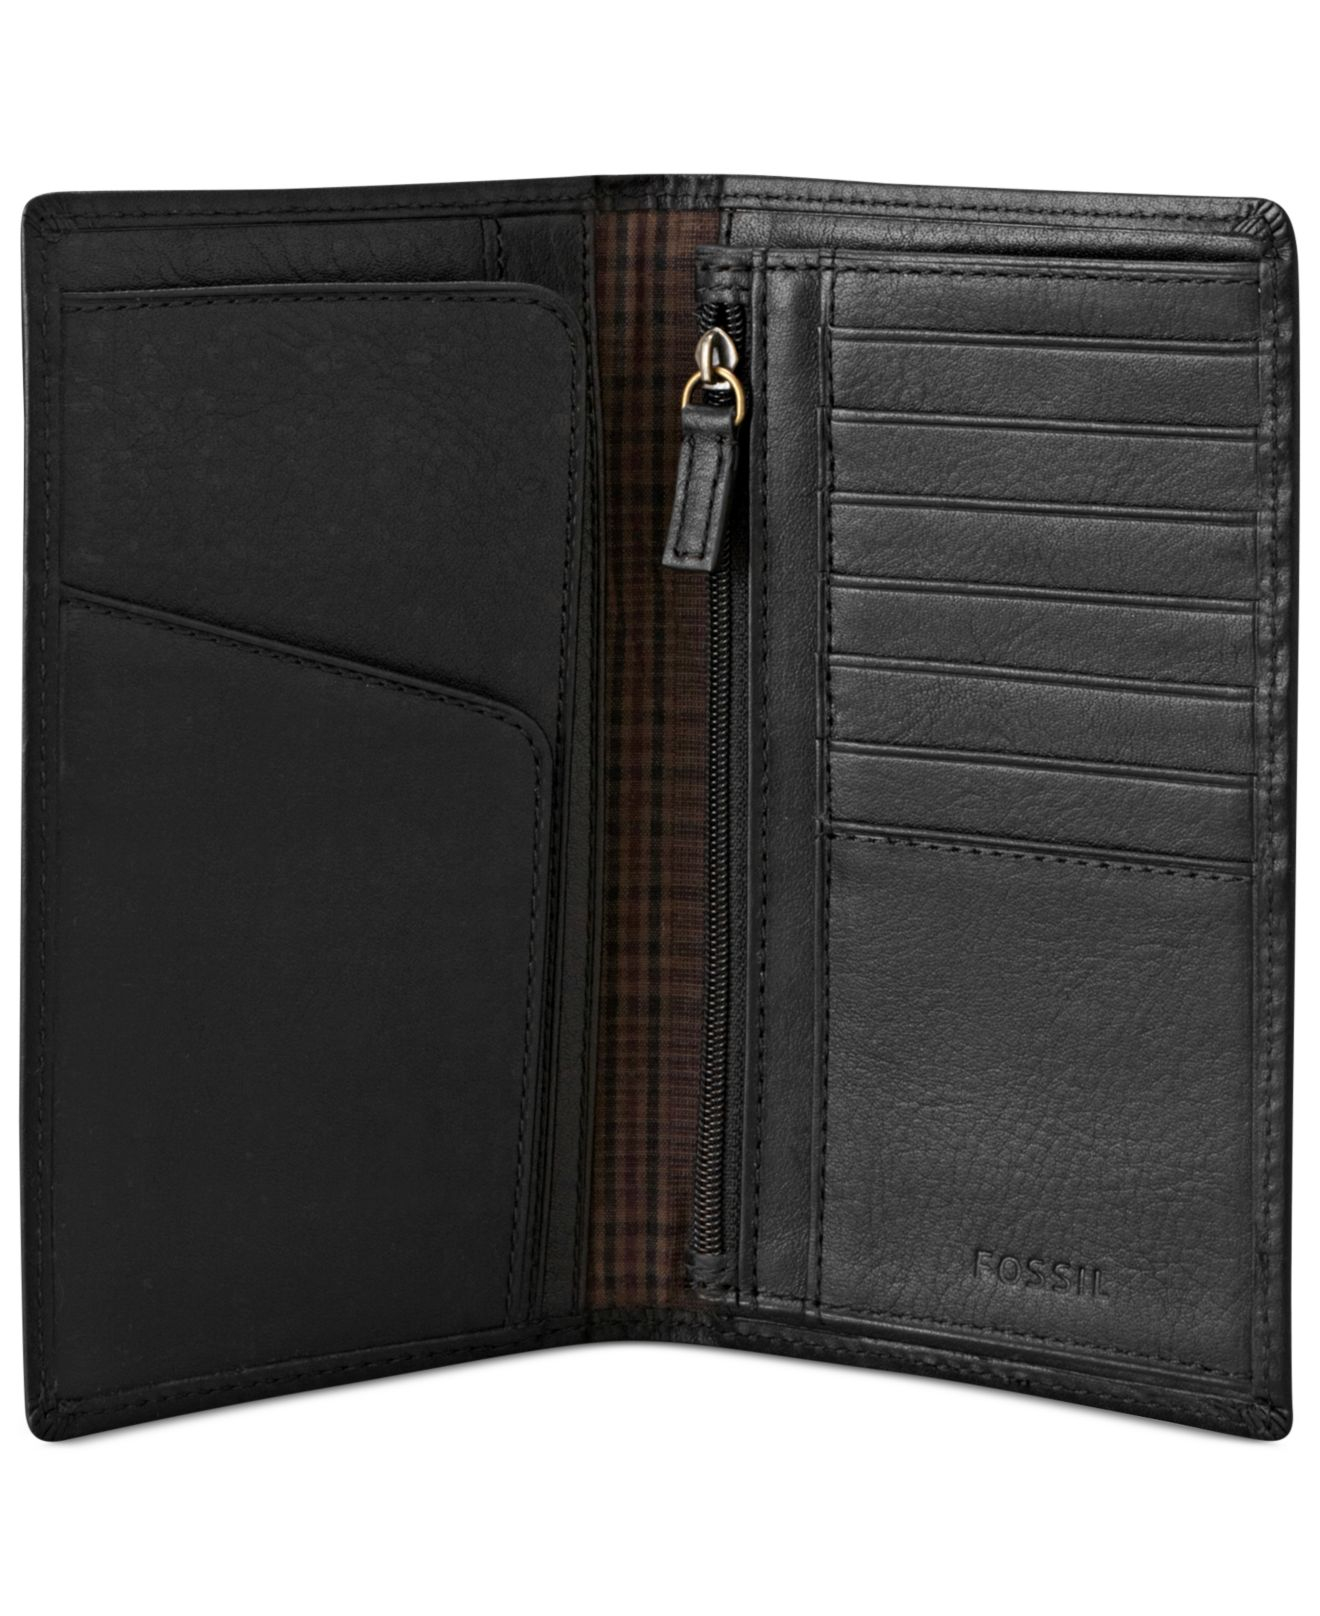 Lyst - Fossil Estate Executive Leather Wallet in Black for Men